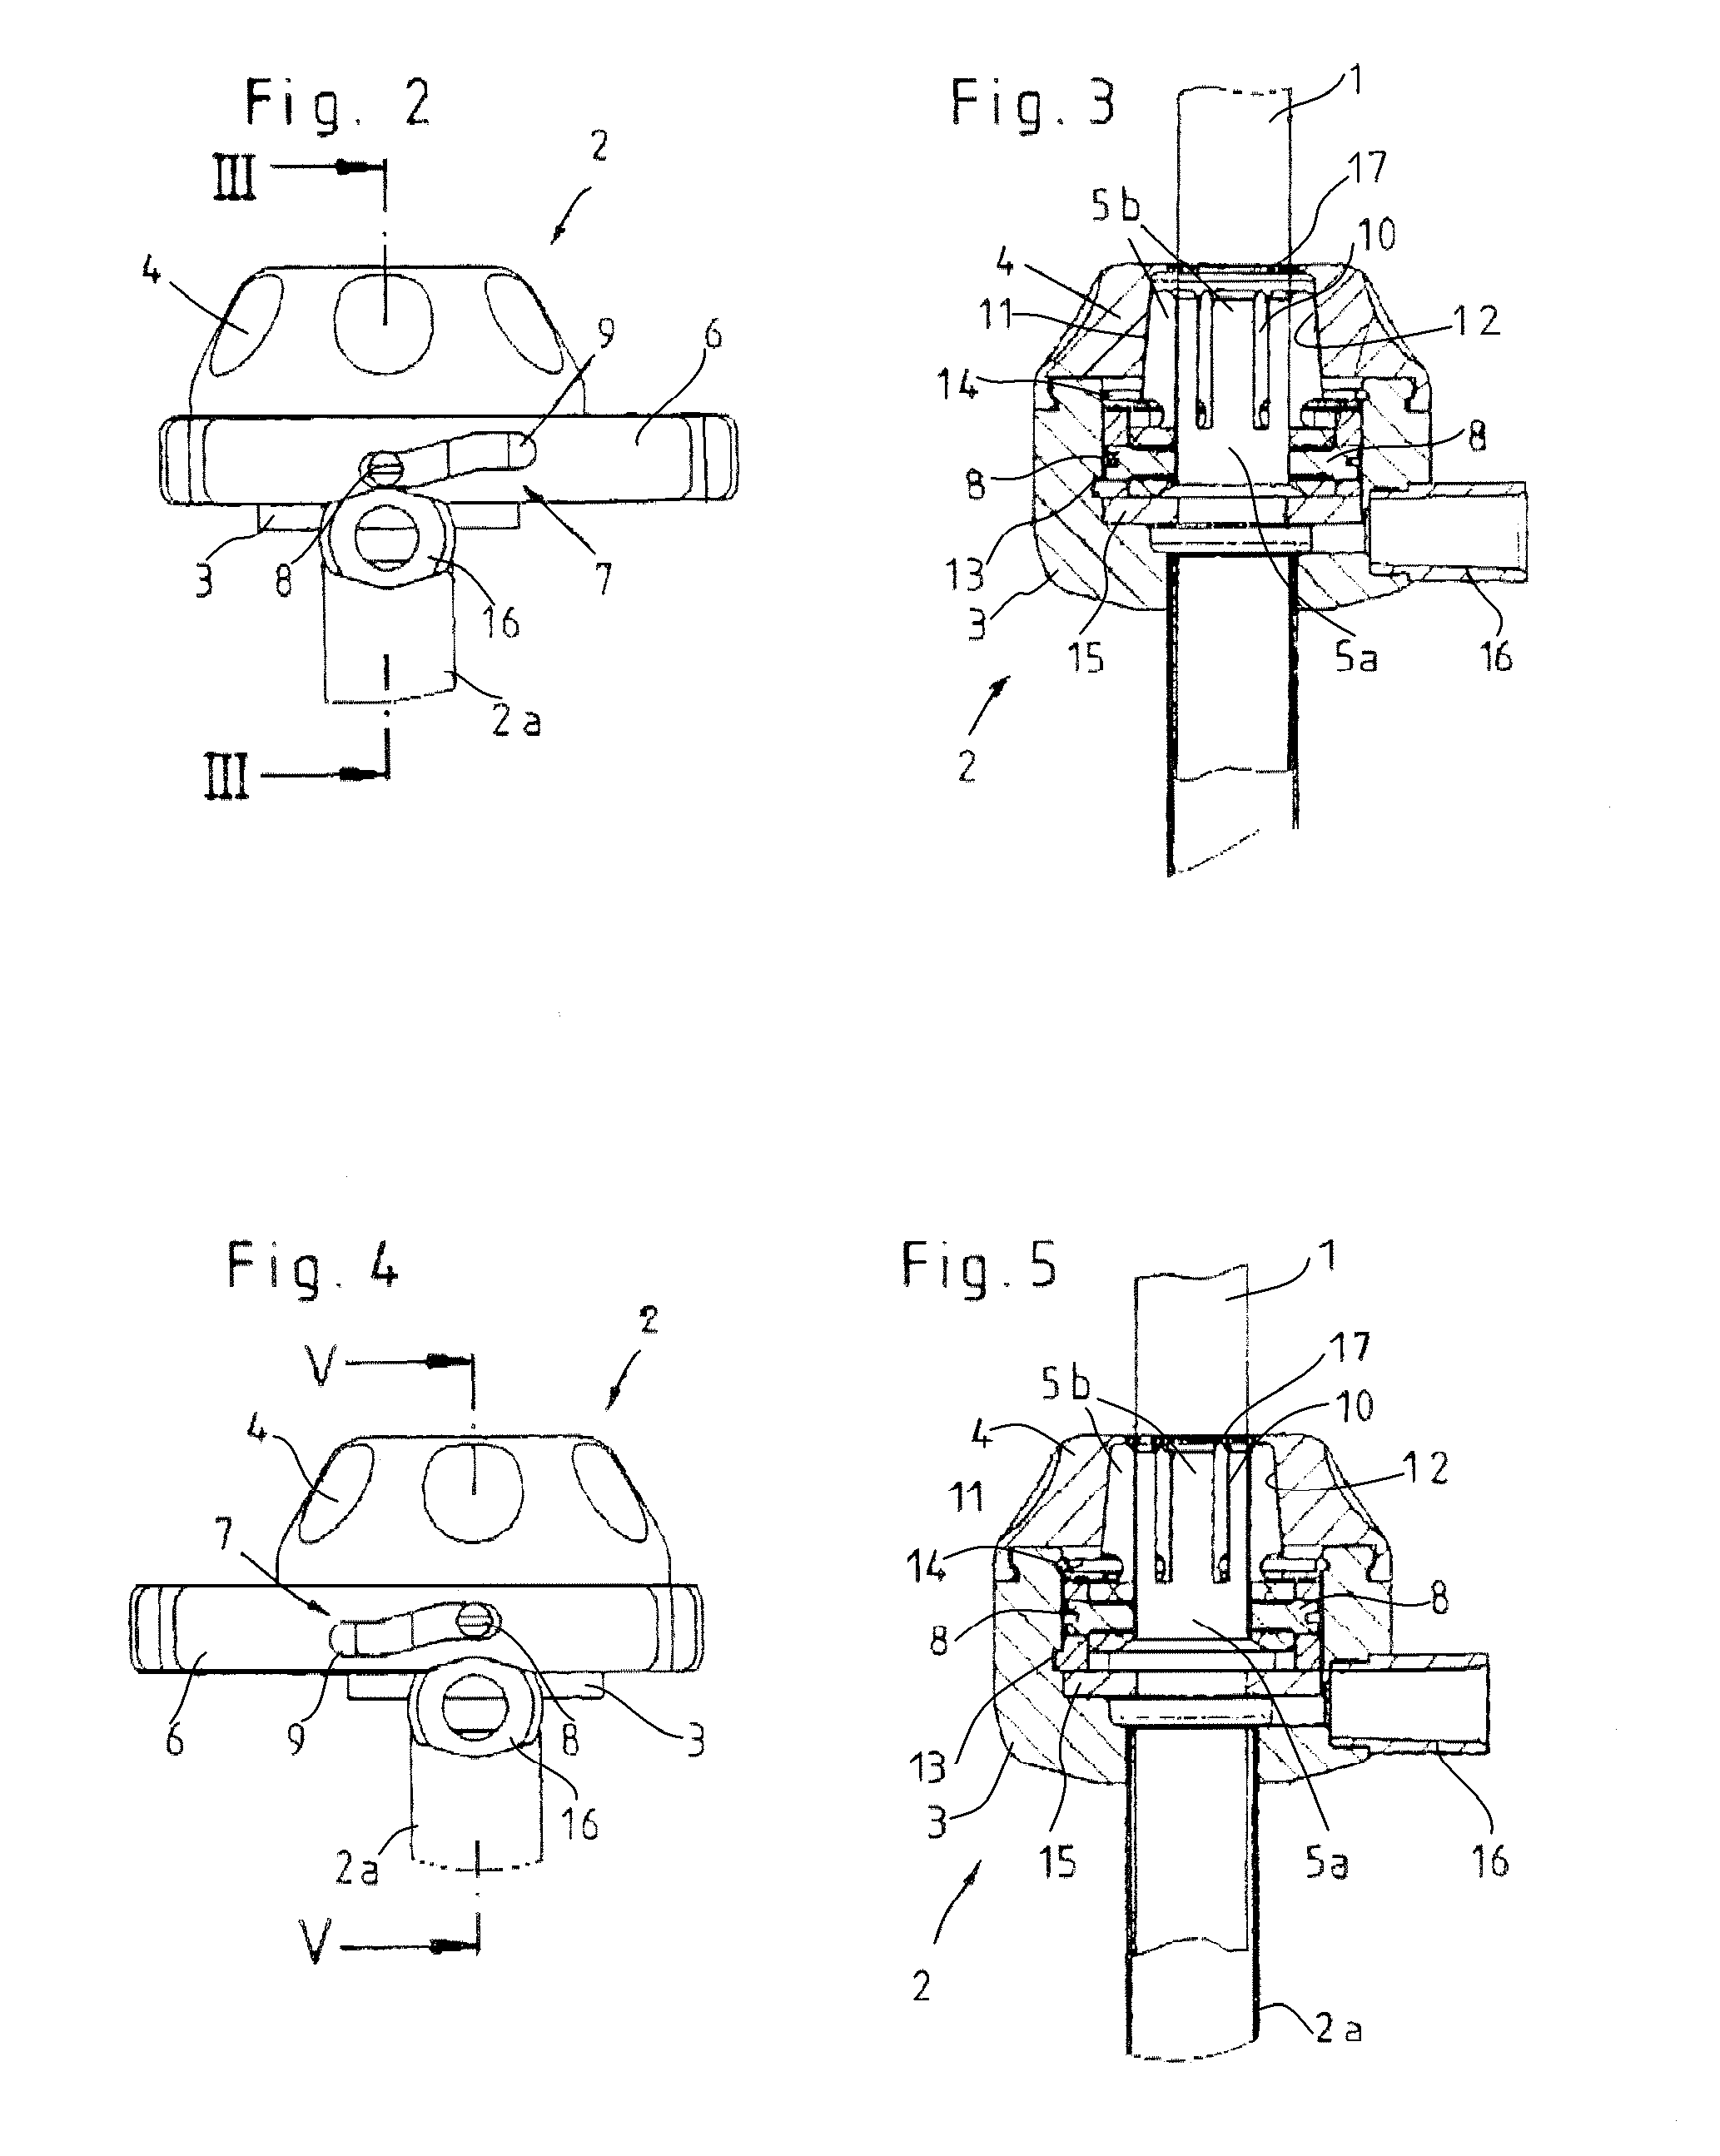 Device for affixing to cylindrical components of medical instruments